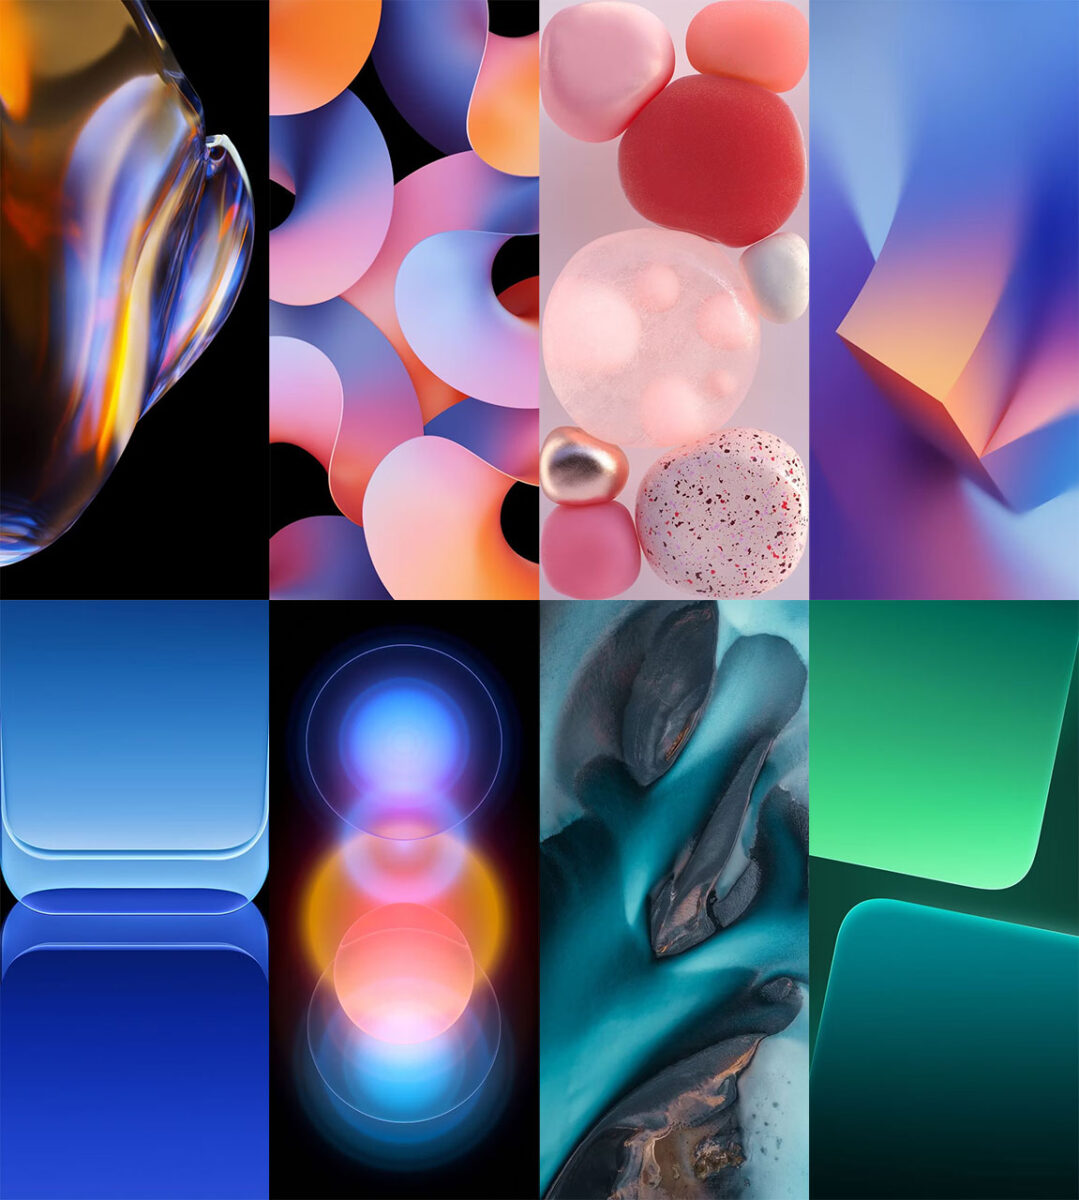 MIUI 14 Wallpapers and Live Wallpapers Download Link in ZIP File